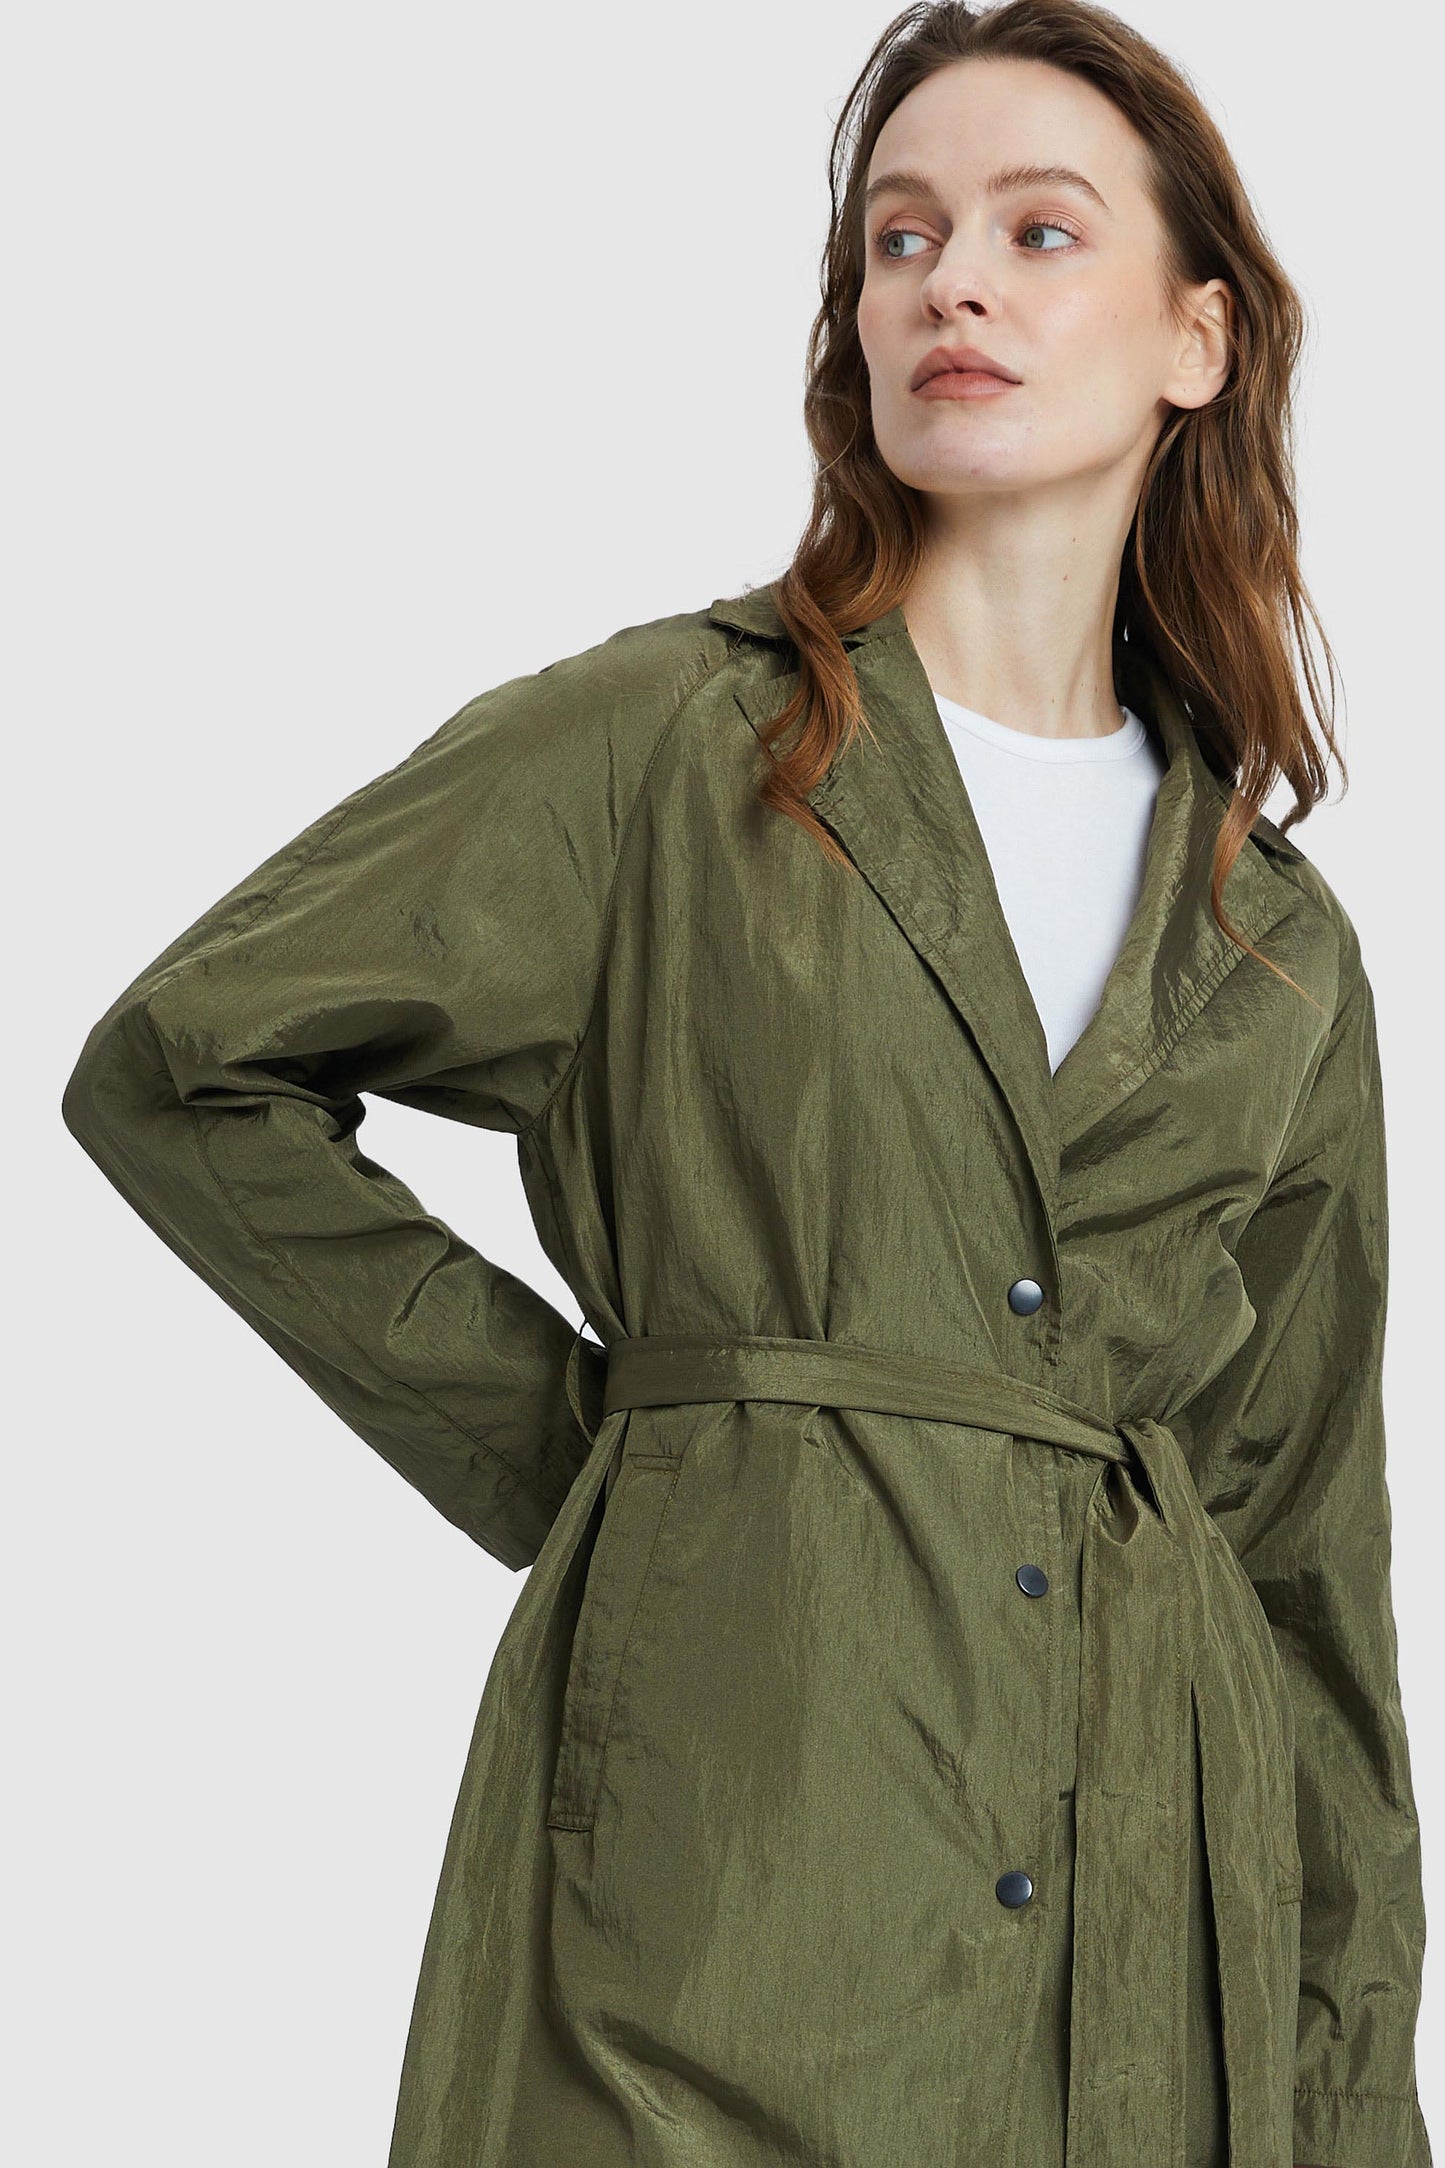 Lightweight Single Breasted Lapel Trench Coat